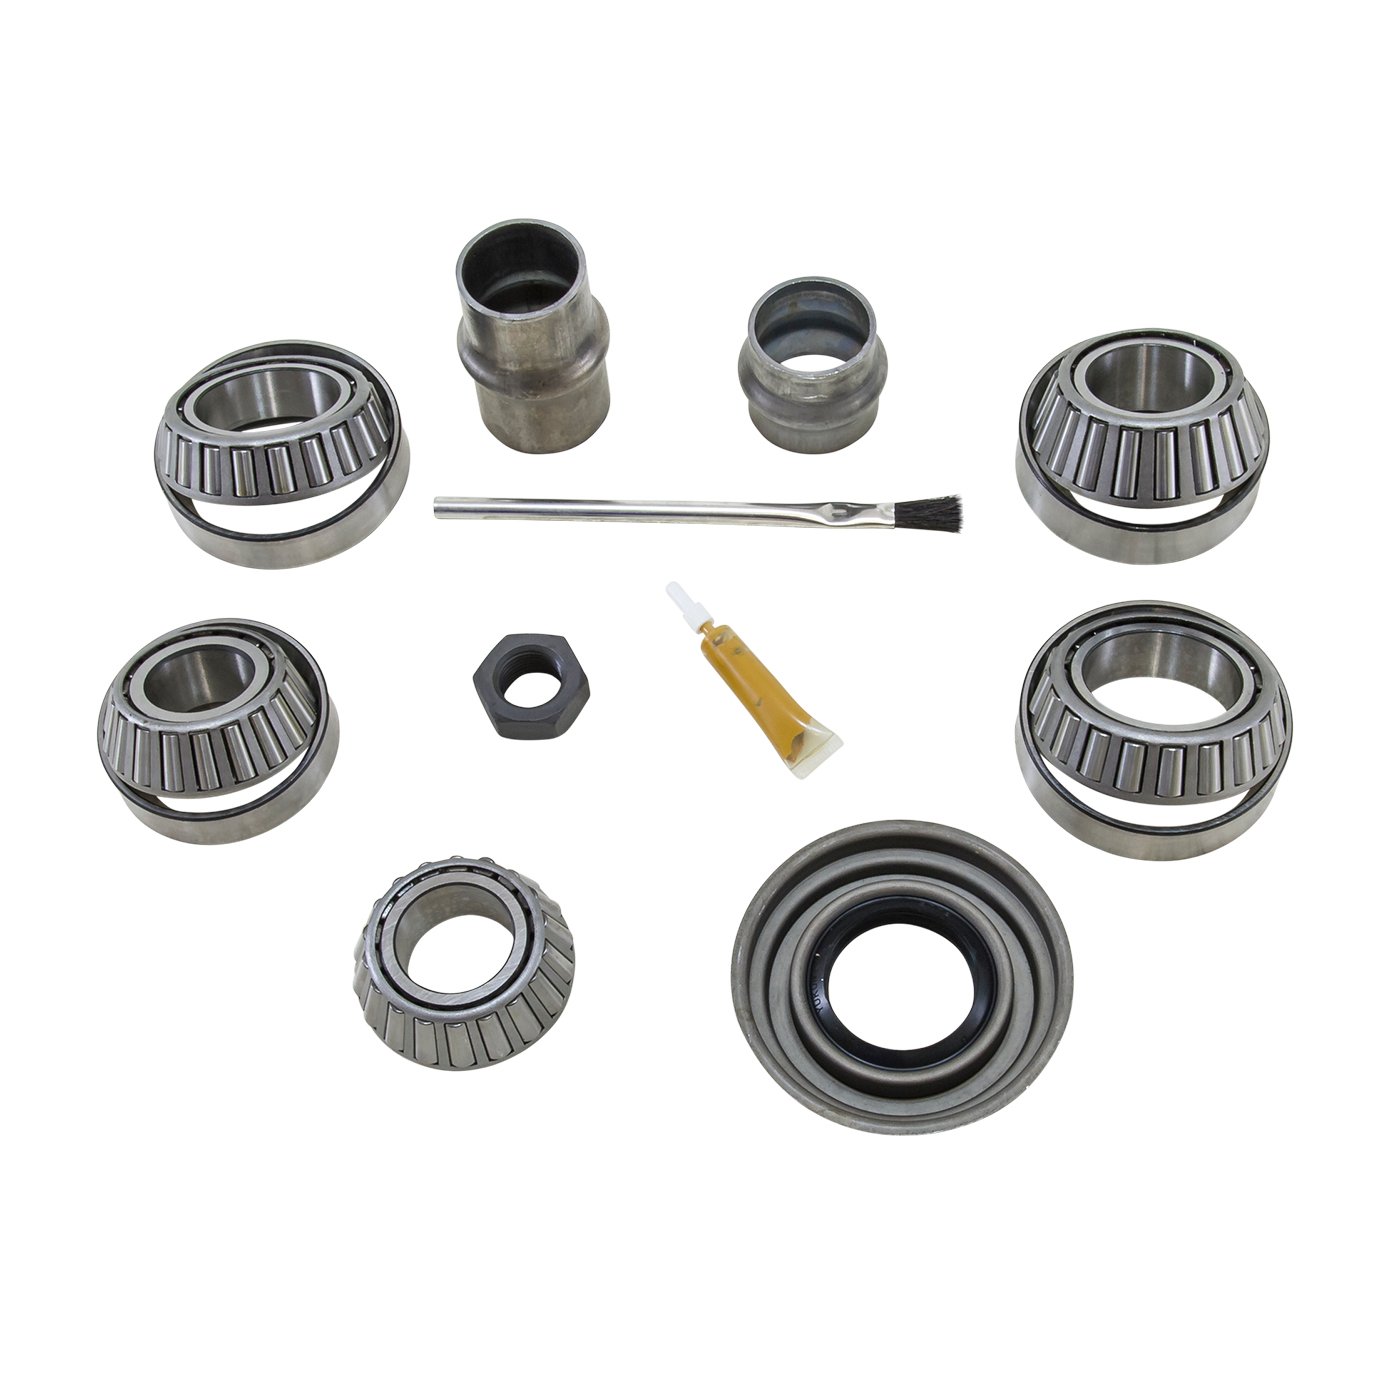 Front/Rear Bearing Installation Kit For Dana 27 Differential Includes: